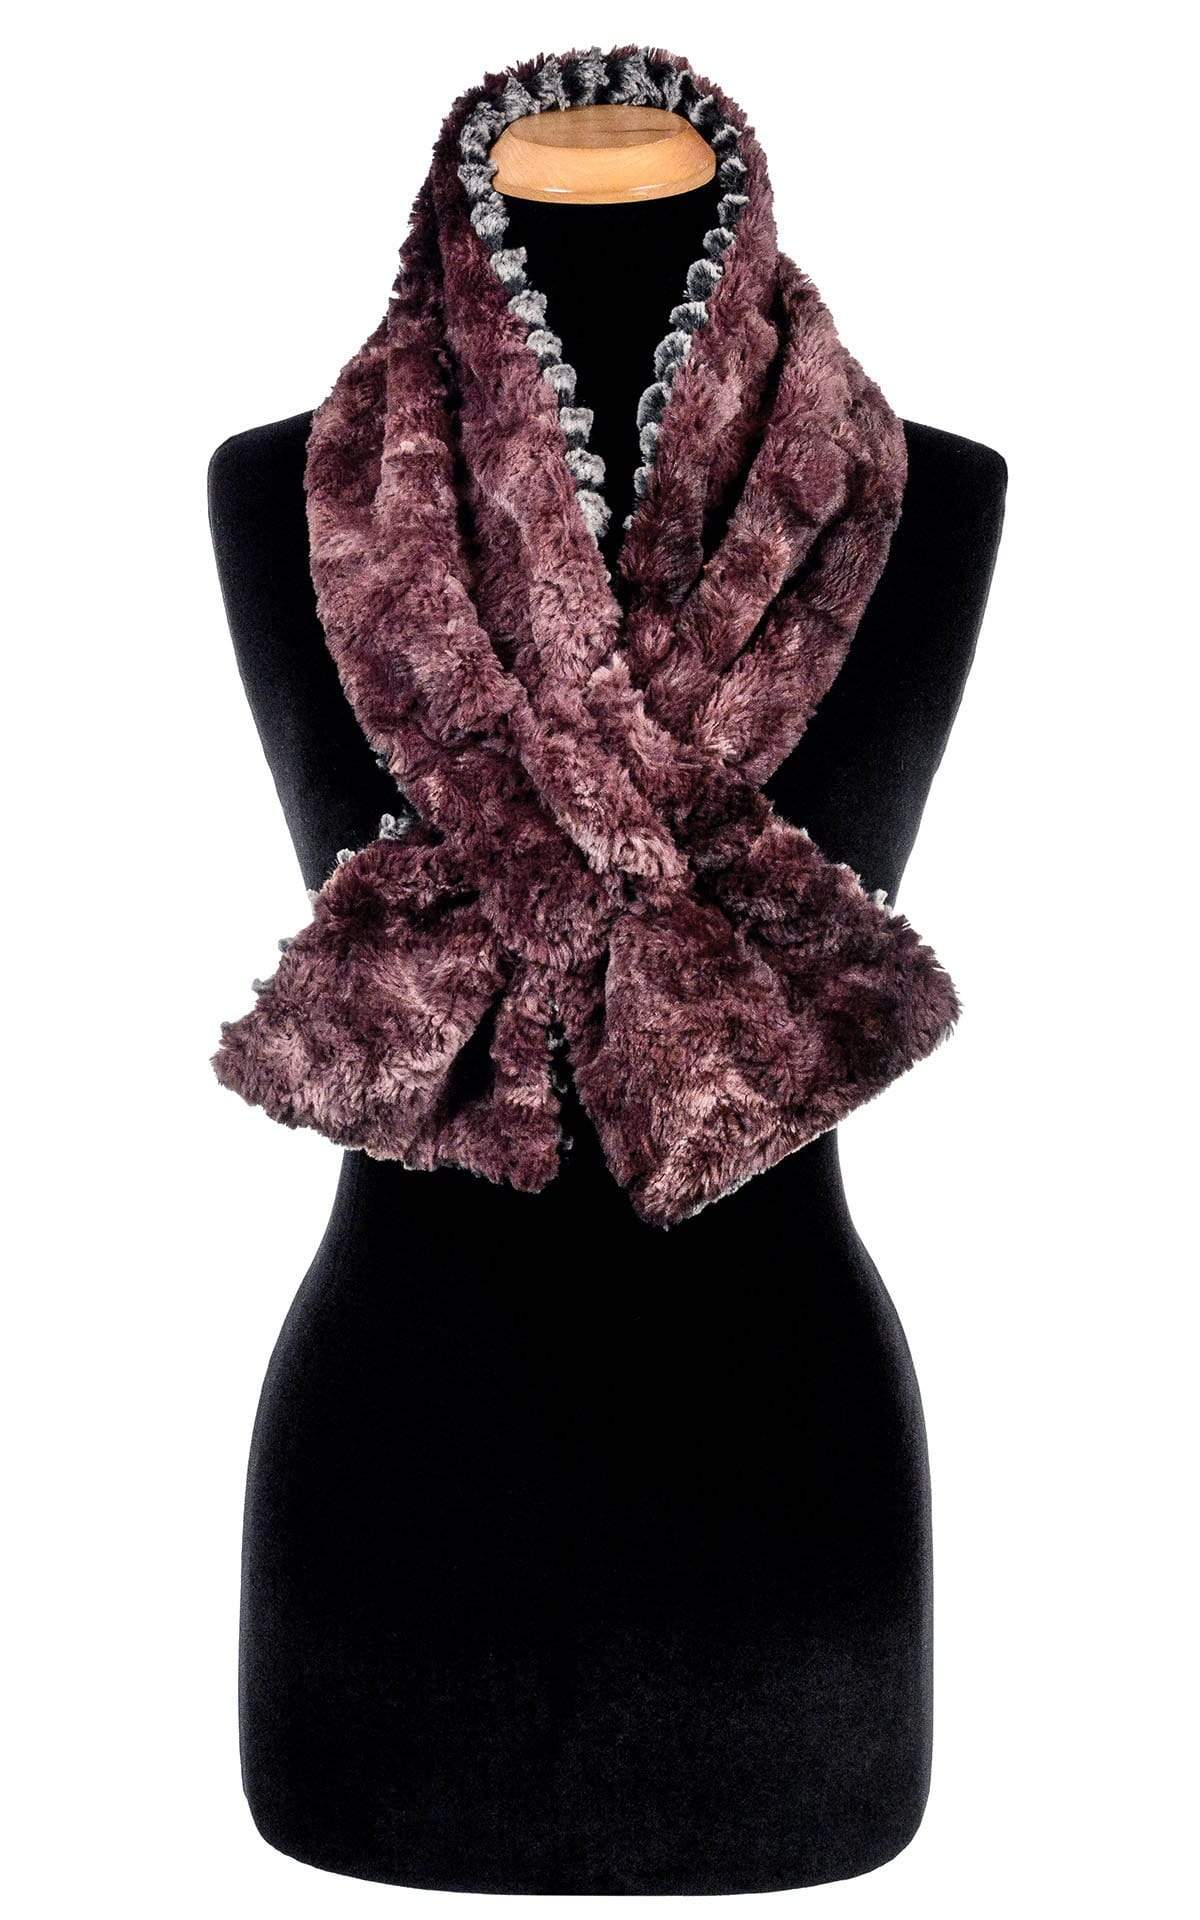  Product shot of Women’s reversible Long Pull Through Scarf shown in reverse | Deseret Sand in Charcoal gray with Highland in Thistle faux fur, Mauve tie-dye and grey | Handmade in Seattle WA | Pandemonium Millinery